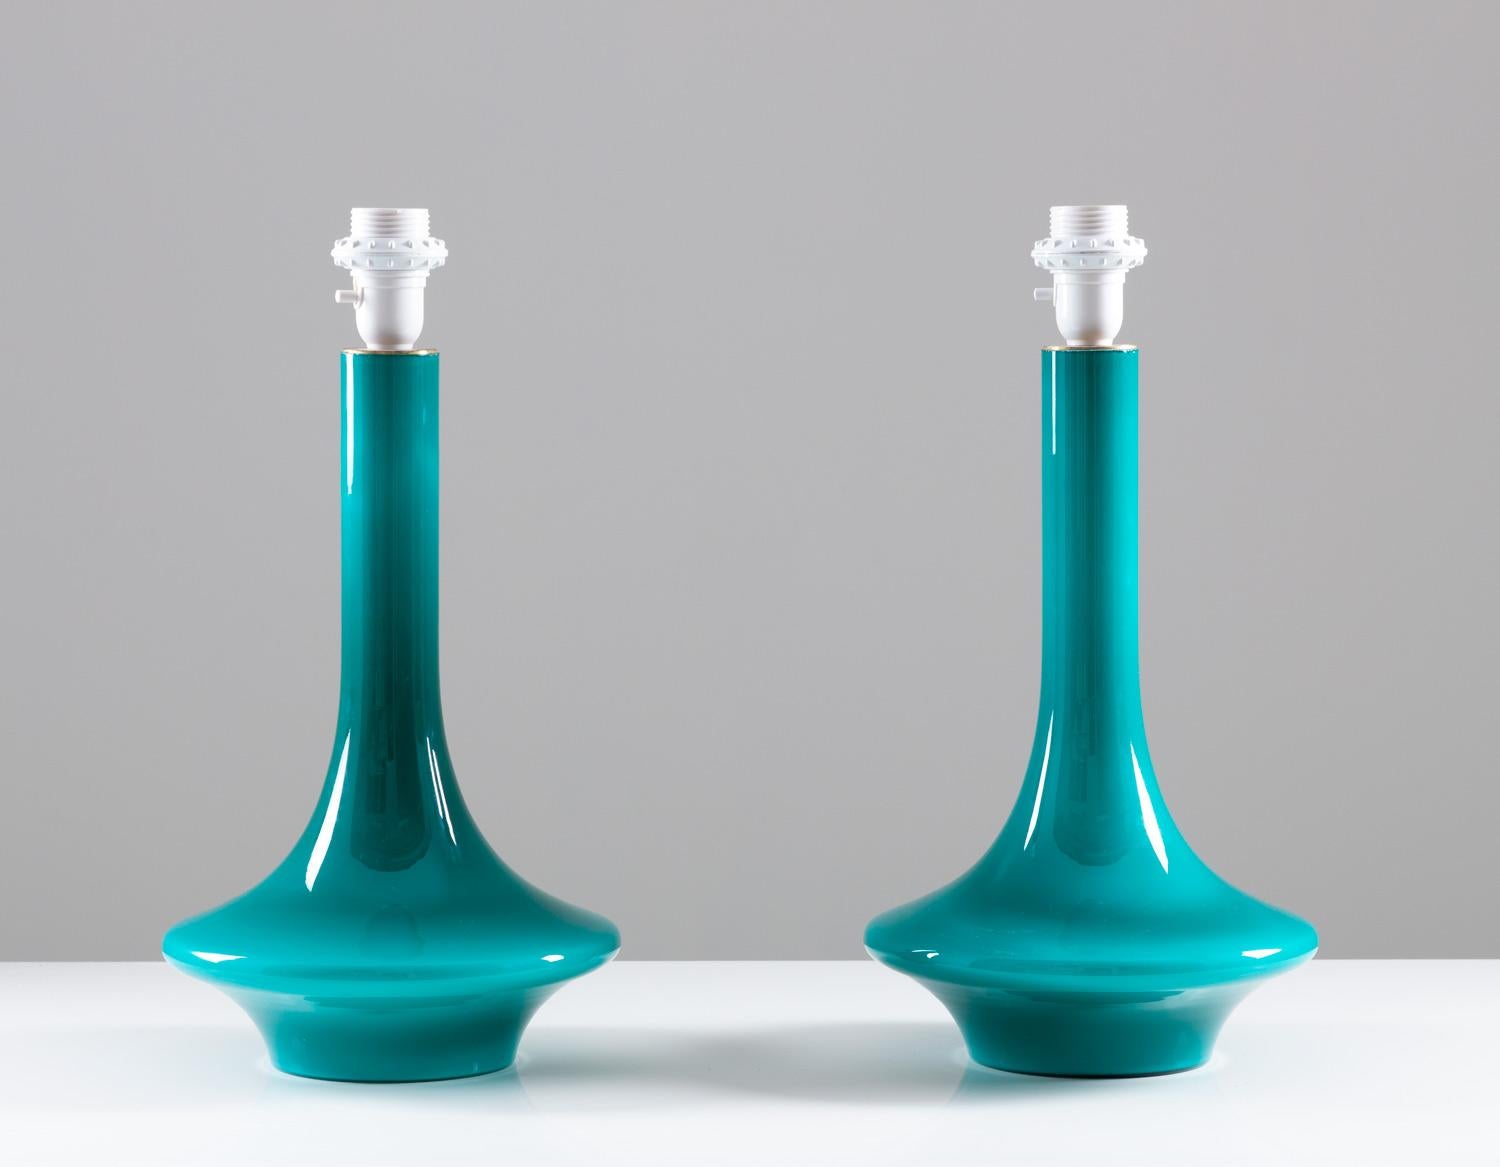 Set of two table lamps, probably manufactured by Luxus, Sweden, 1960s.
The lamps are made of glass with brass details. The design is simple and elegant with the slim waist and deep turquoise color.
Condition: Excellent vintage condition
Measures: